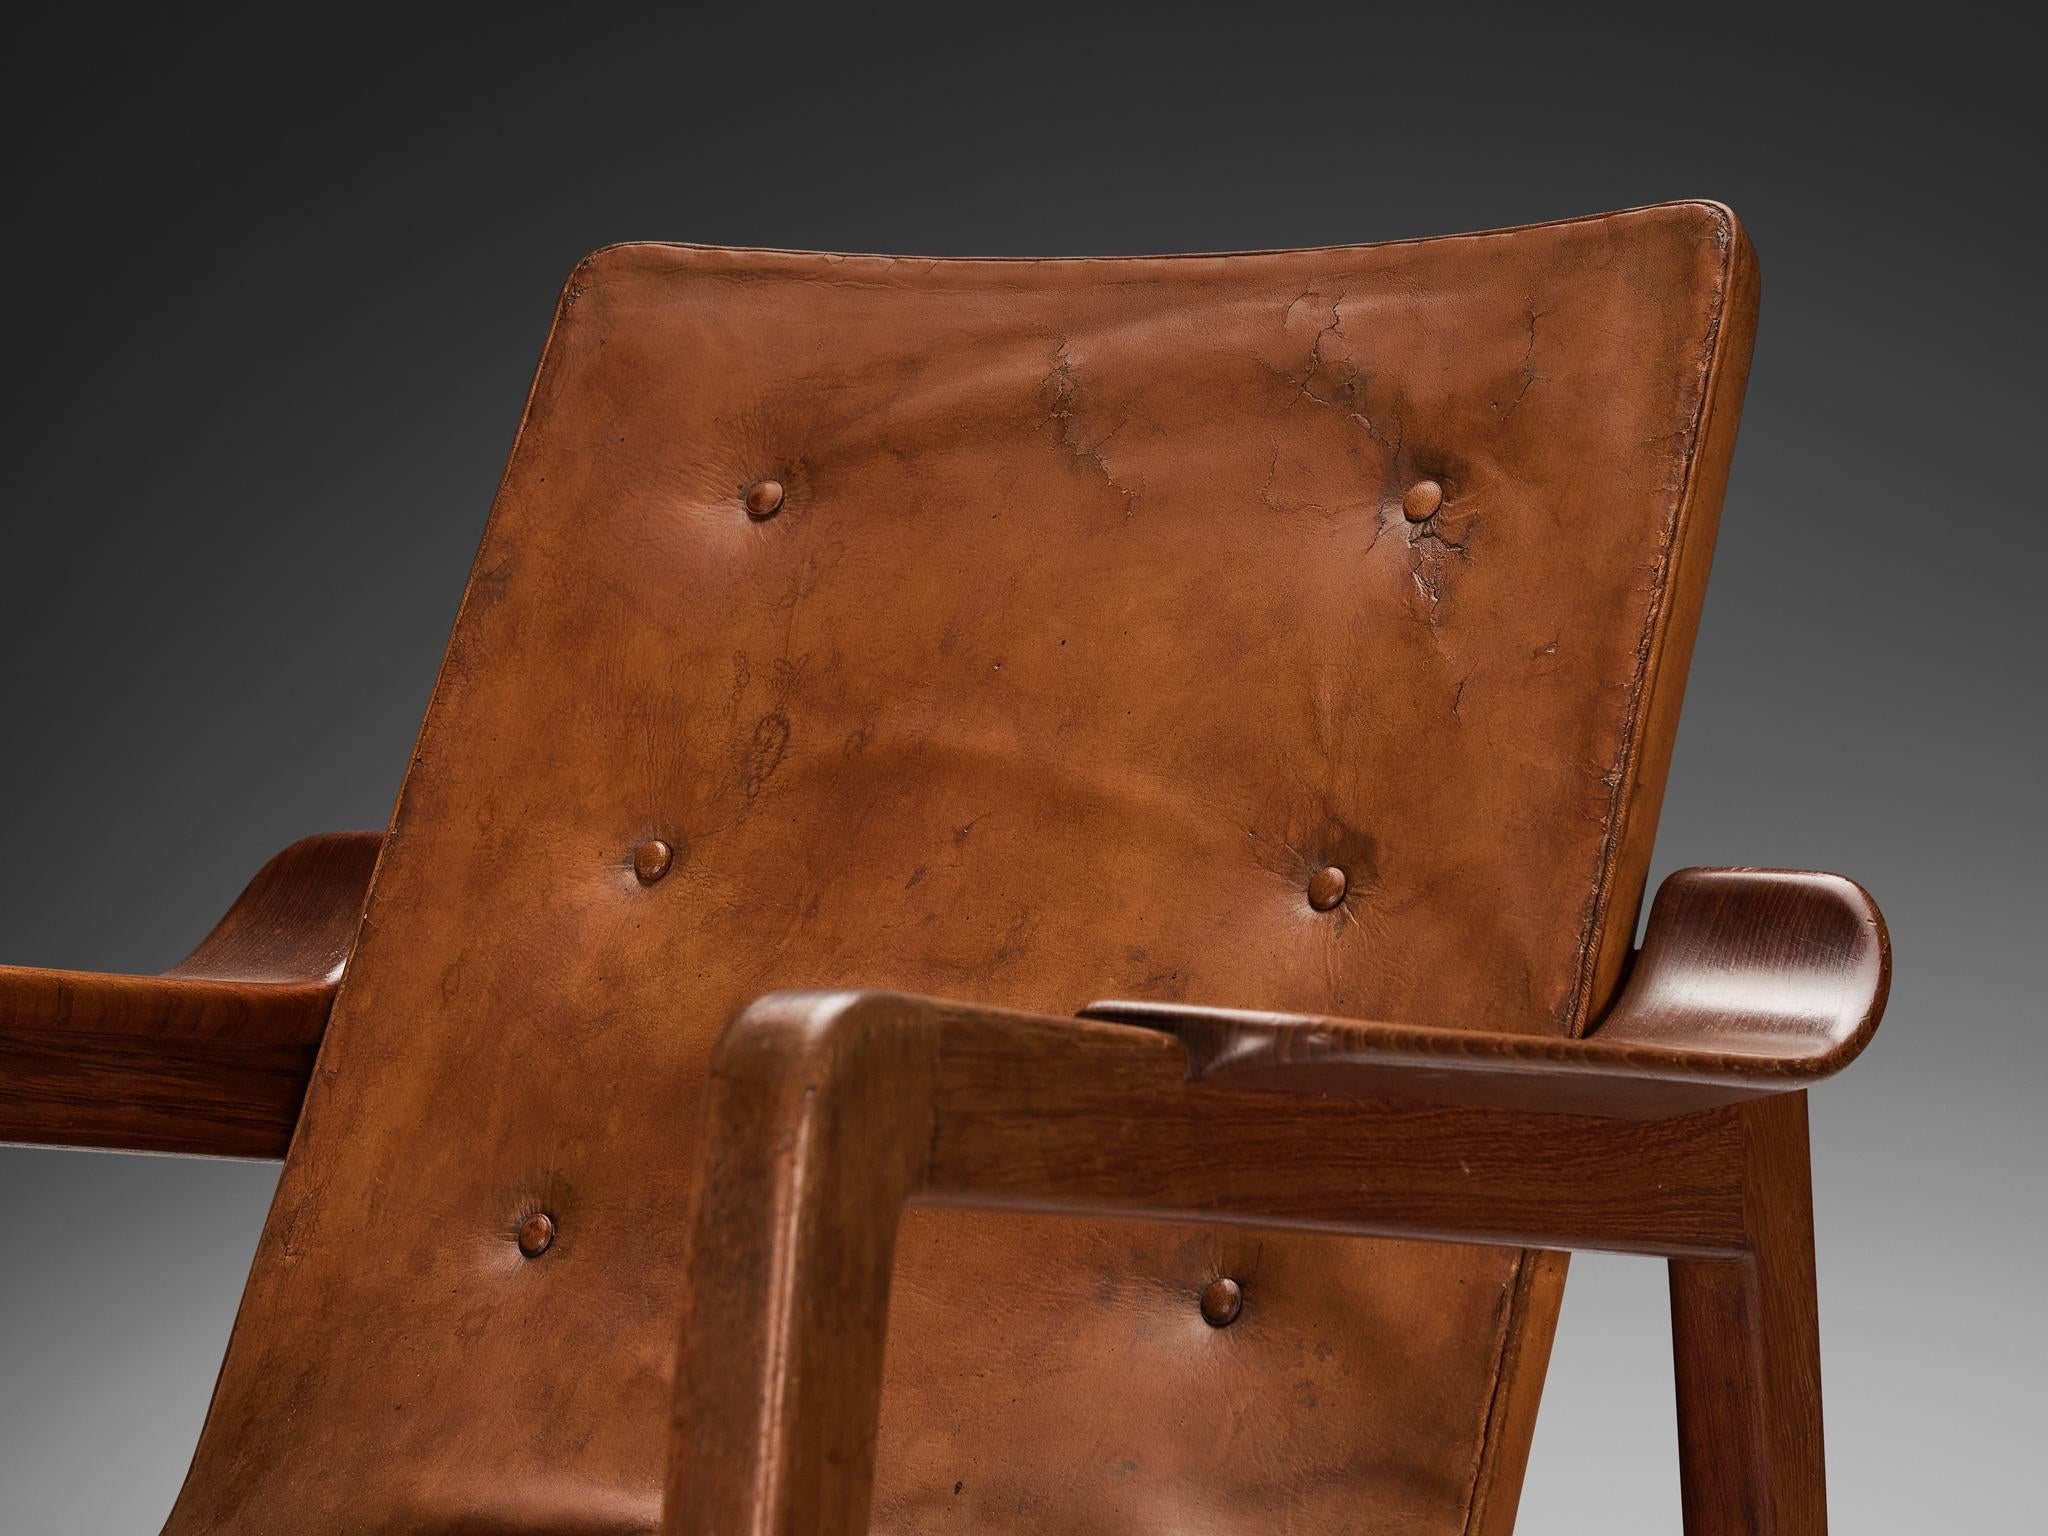 Tove & Edvard Kindt-Larsen Pair of 'Fireside' Armchairs in Original Leather